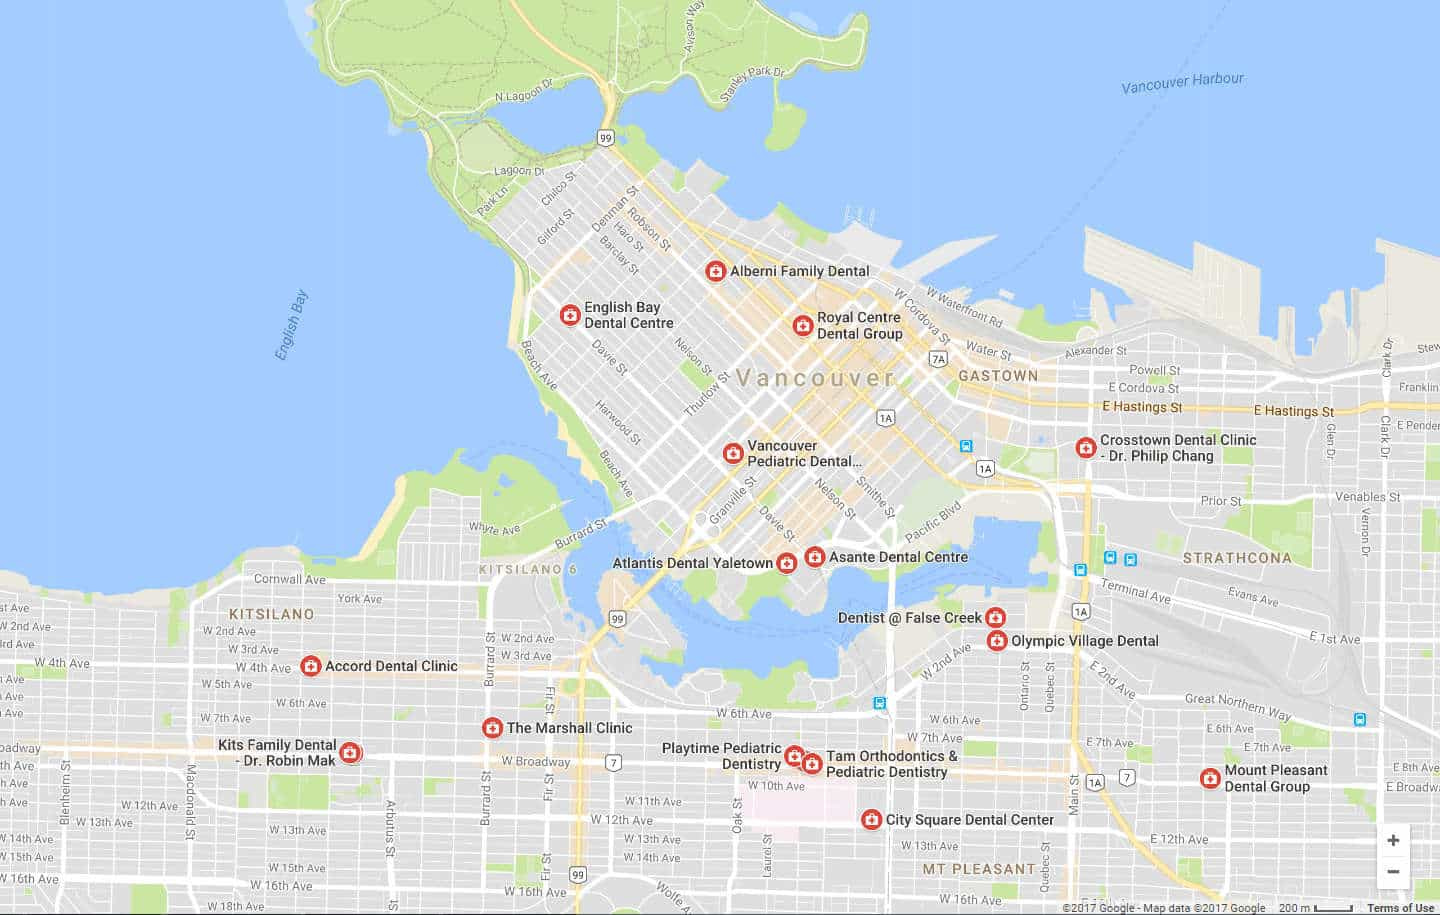 Google Map: Help Patients Find Your Location, Get Driving Directions, and Write Reviews